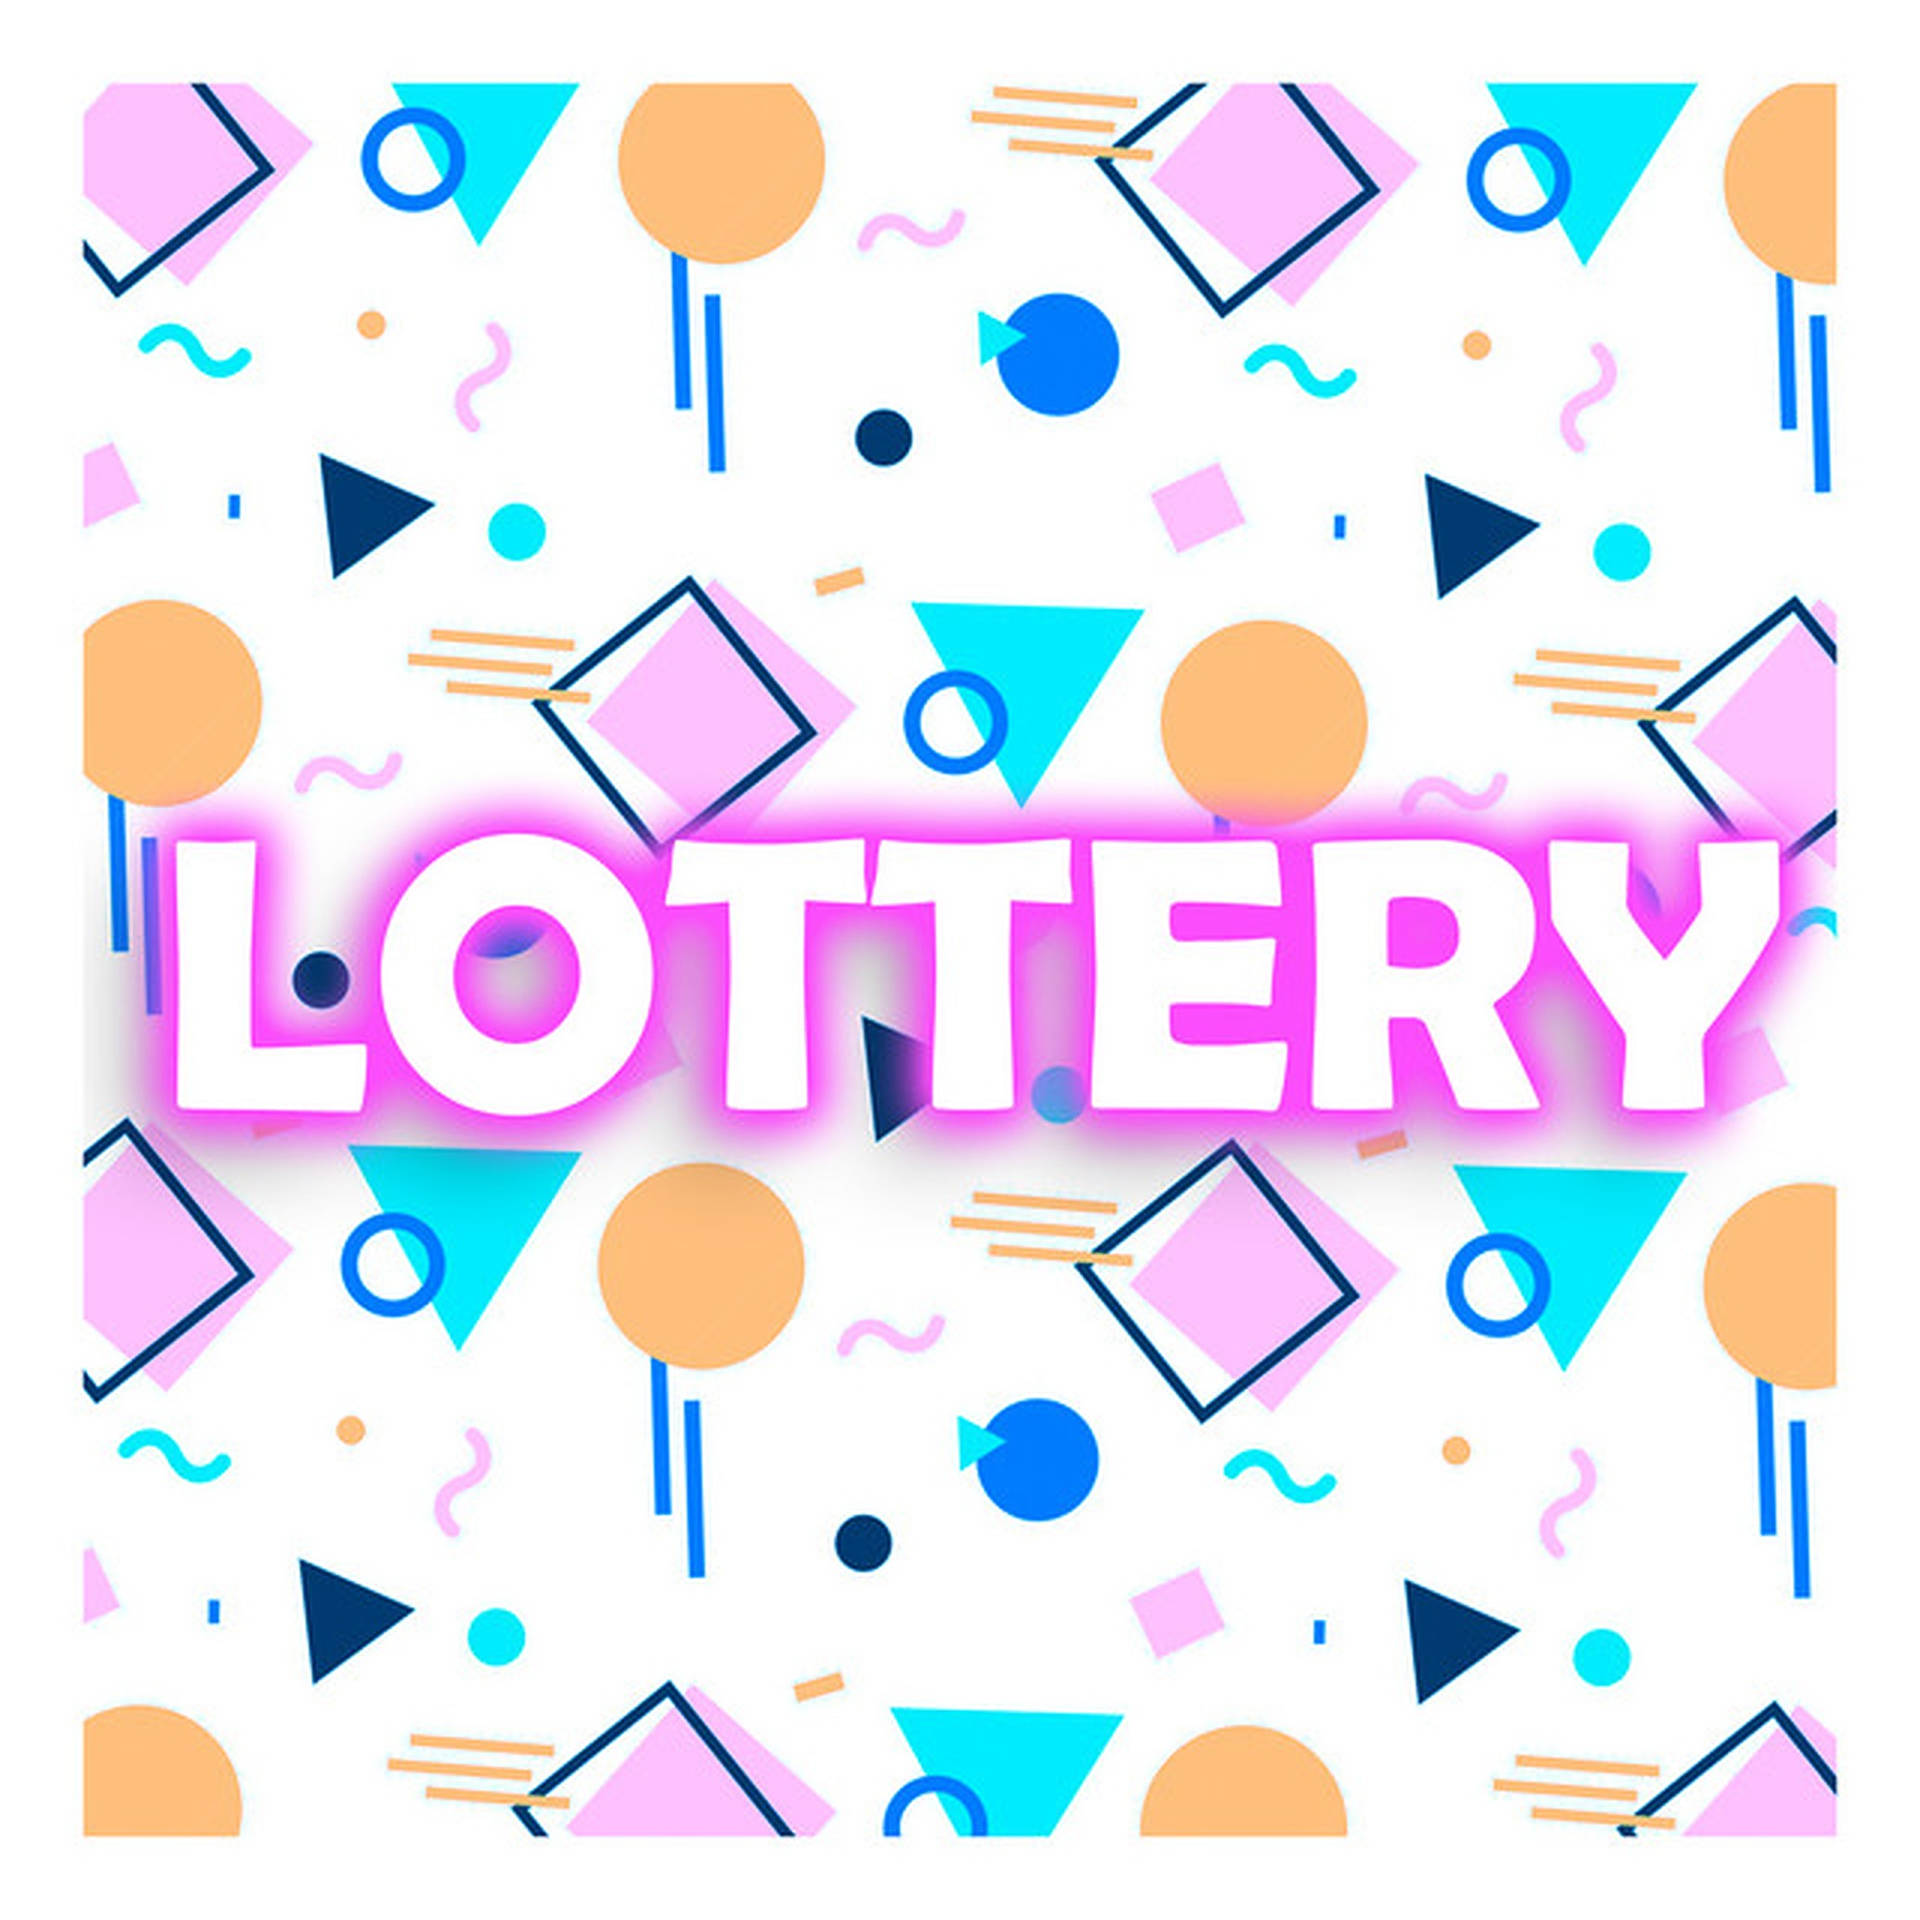 Lottery Abstract Art Background